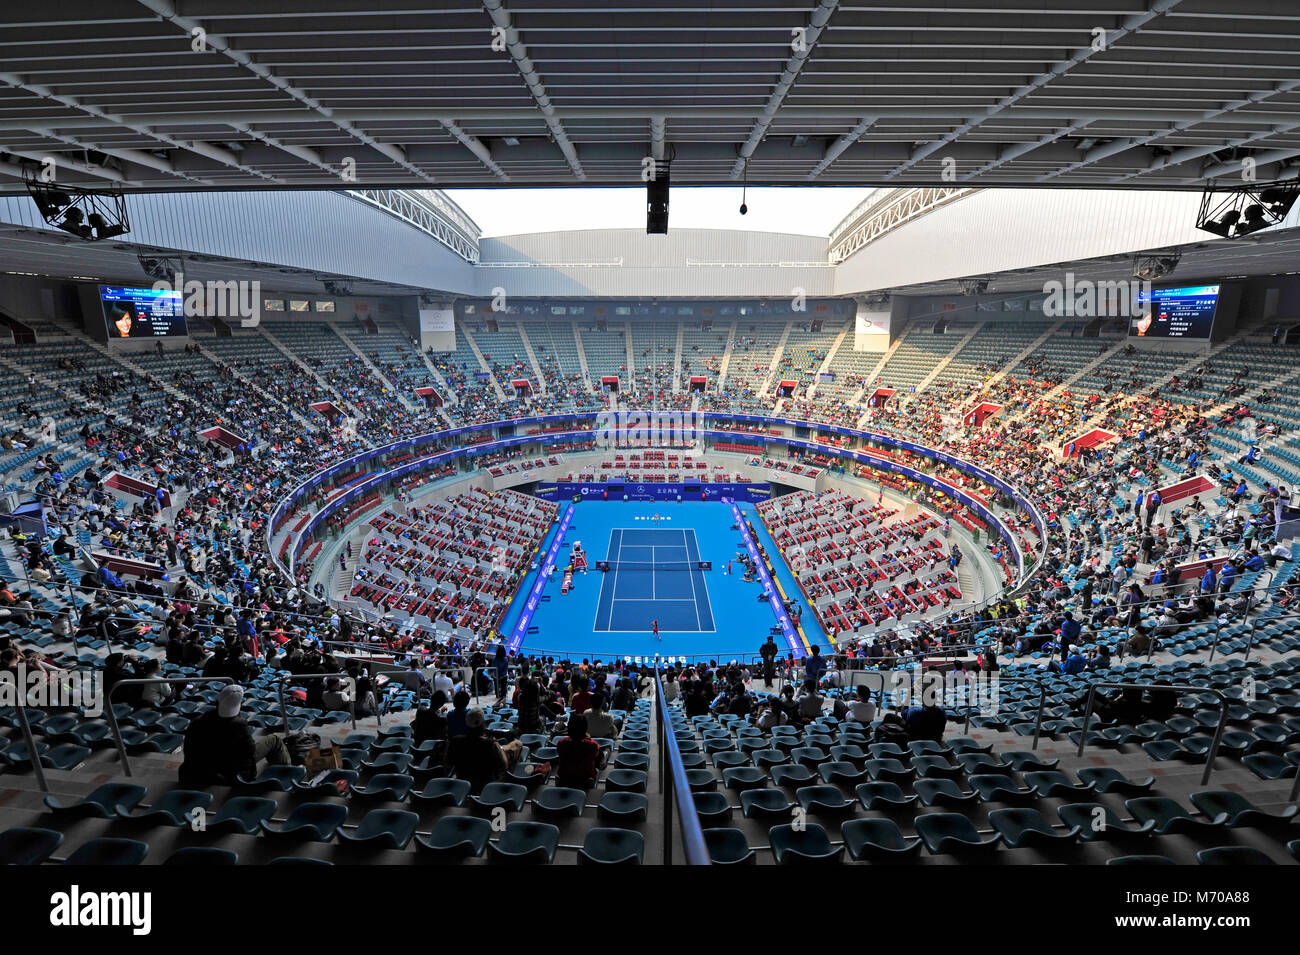 Diamond court at the China National Tennis Center in Beijing during the